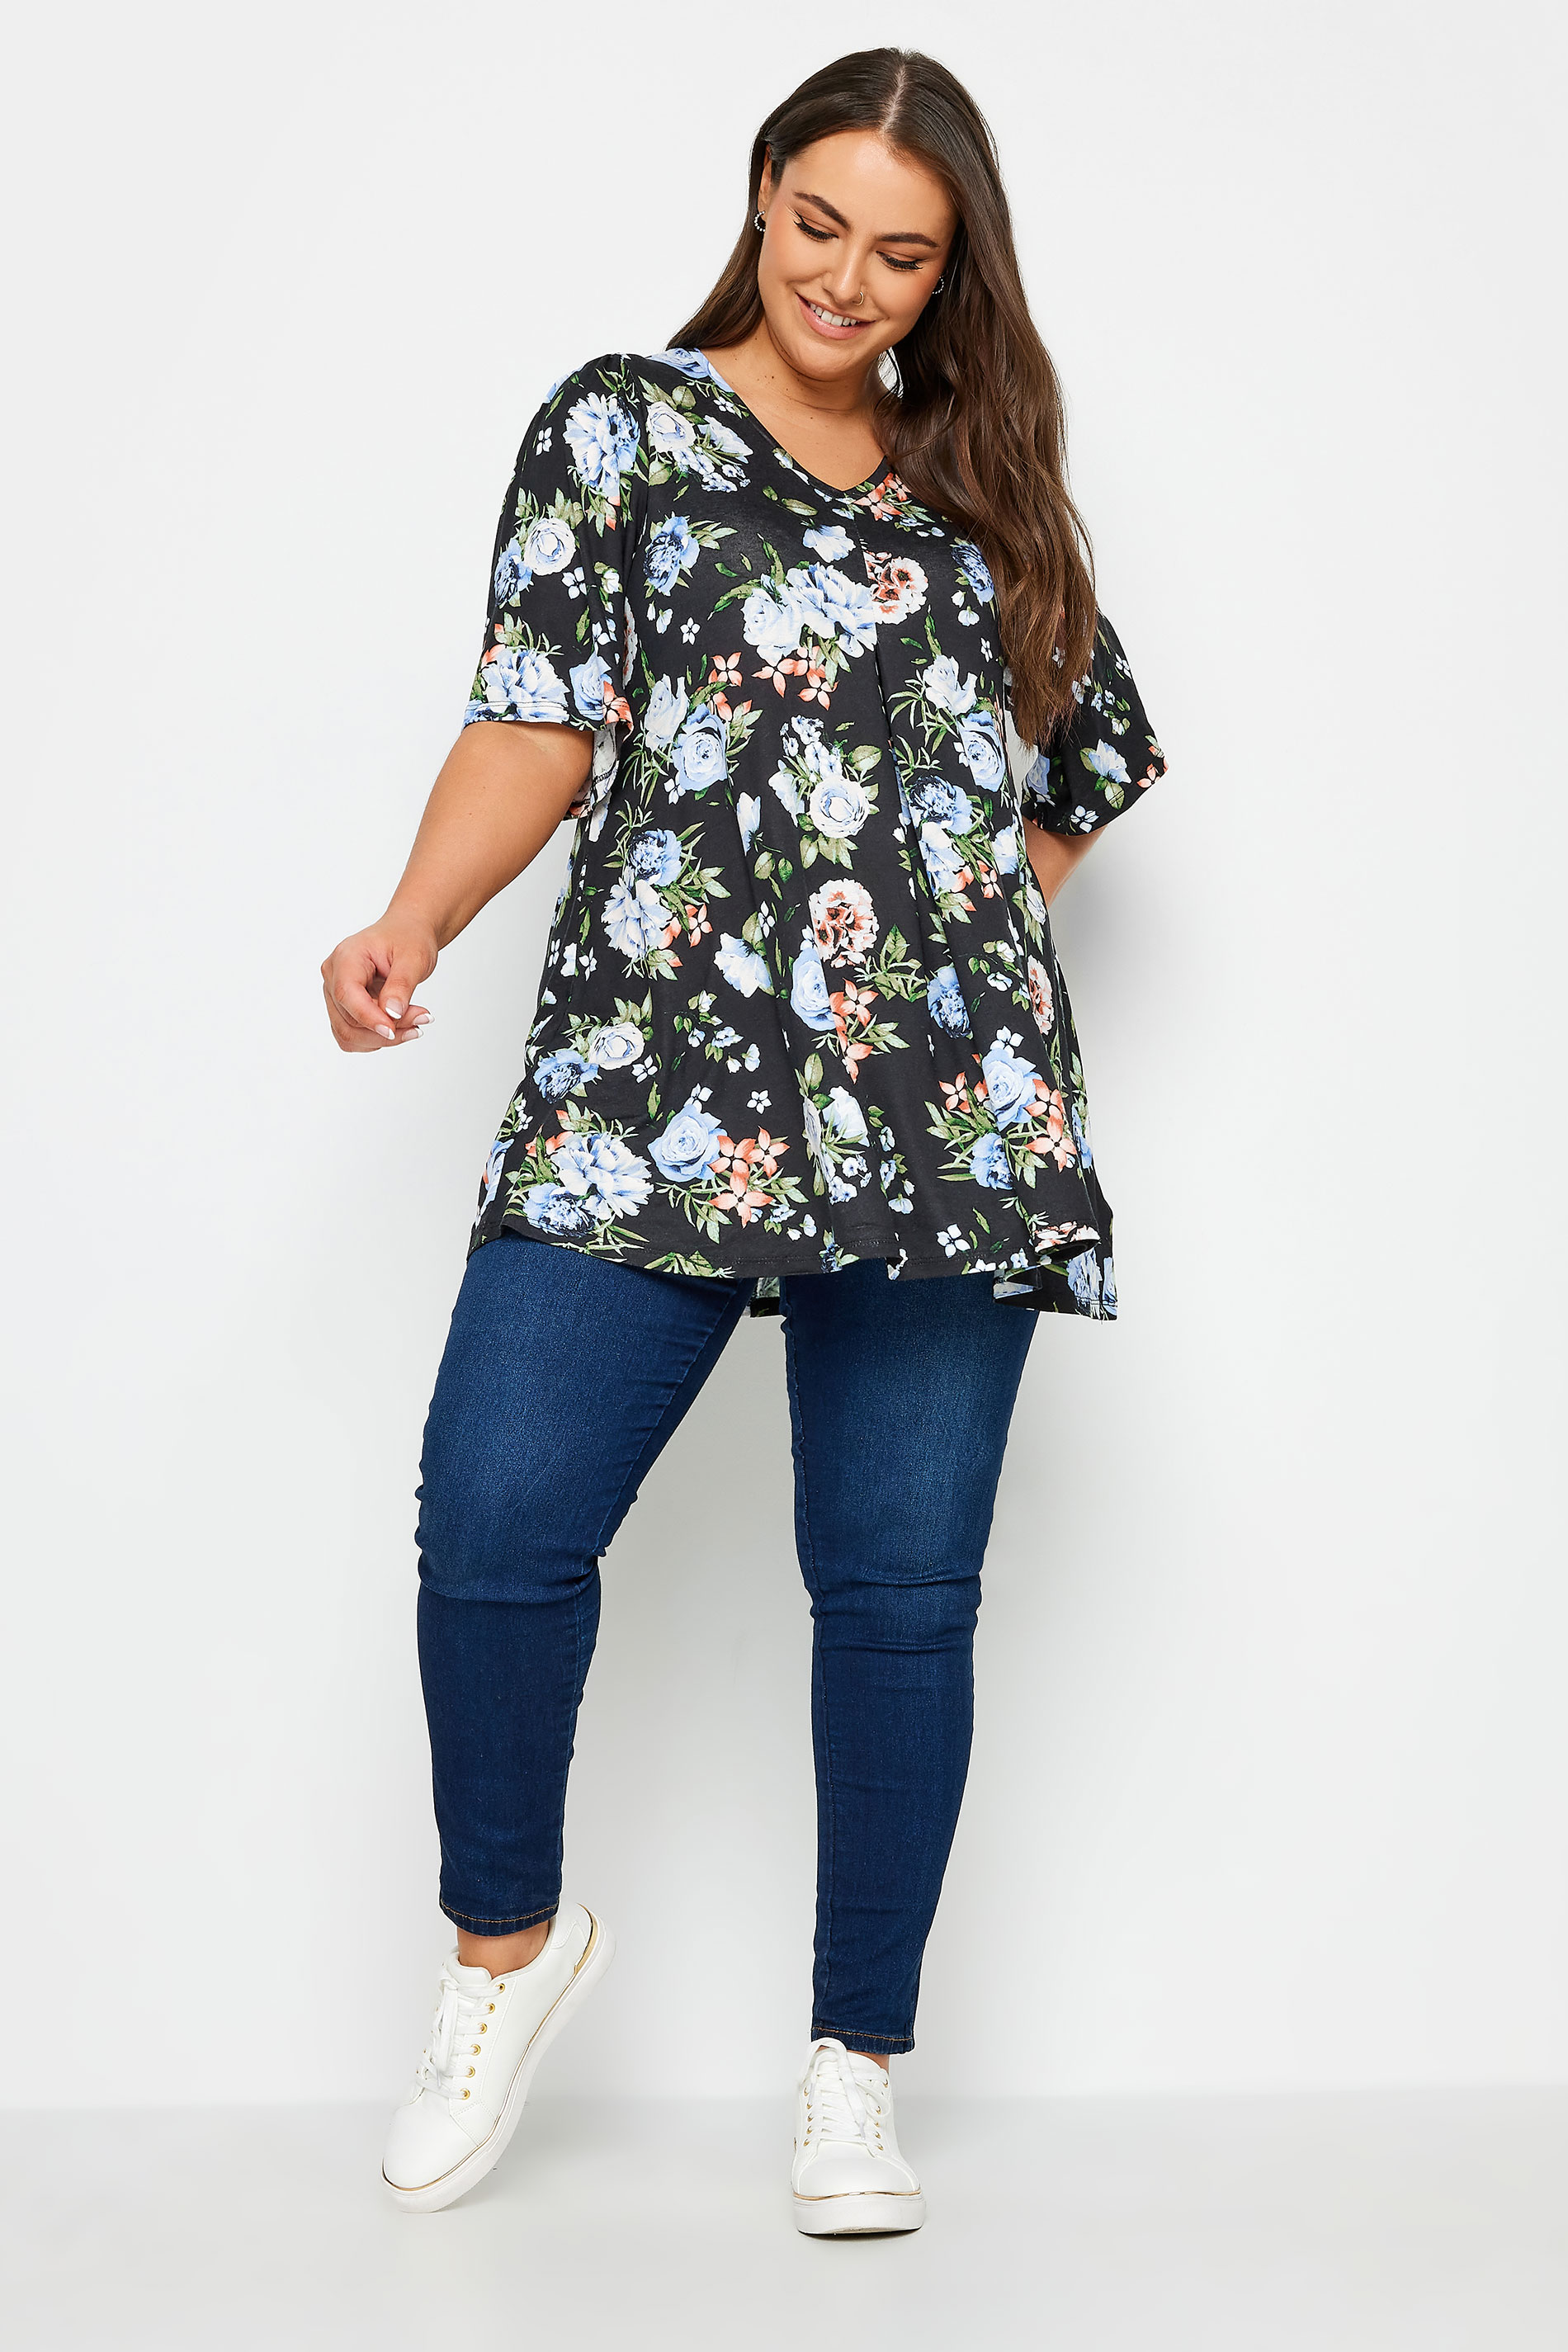 YOURS Plus Size Black & Blue Floral Print Pleated Swing Top | Yours ...